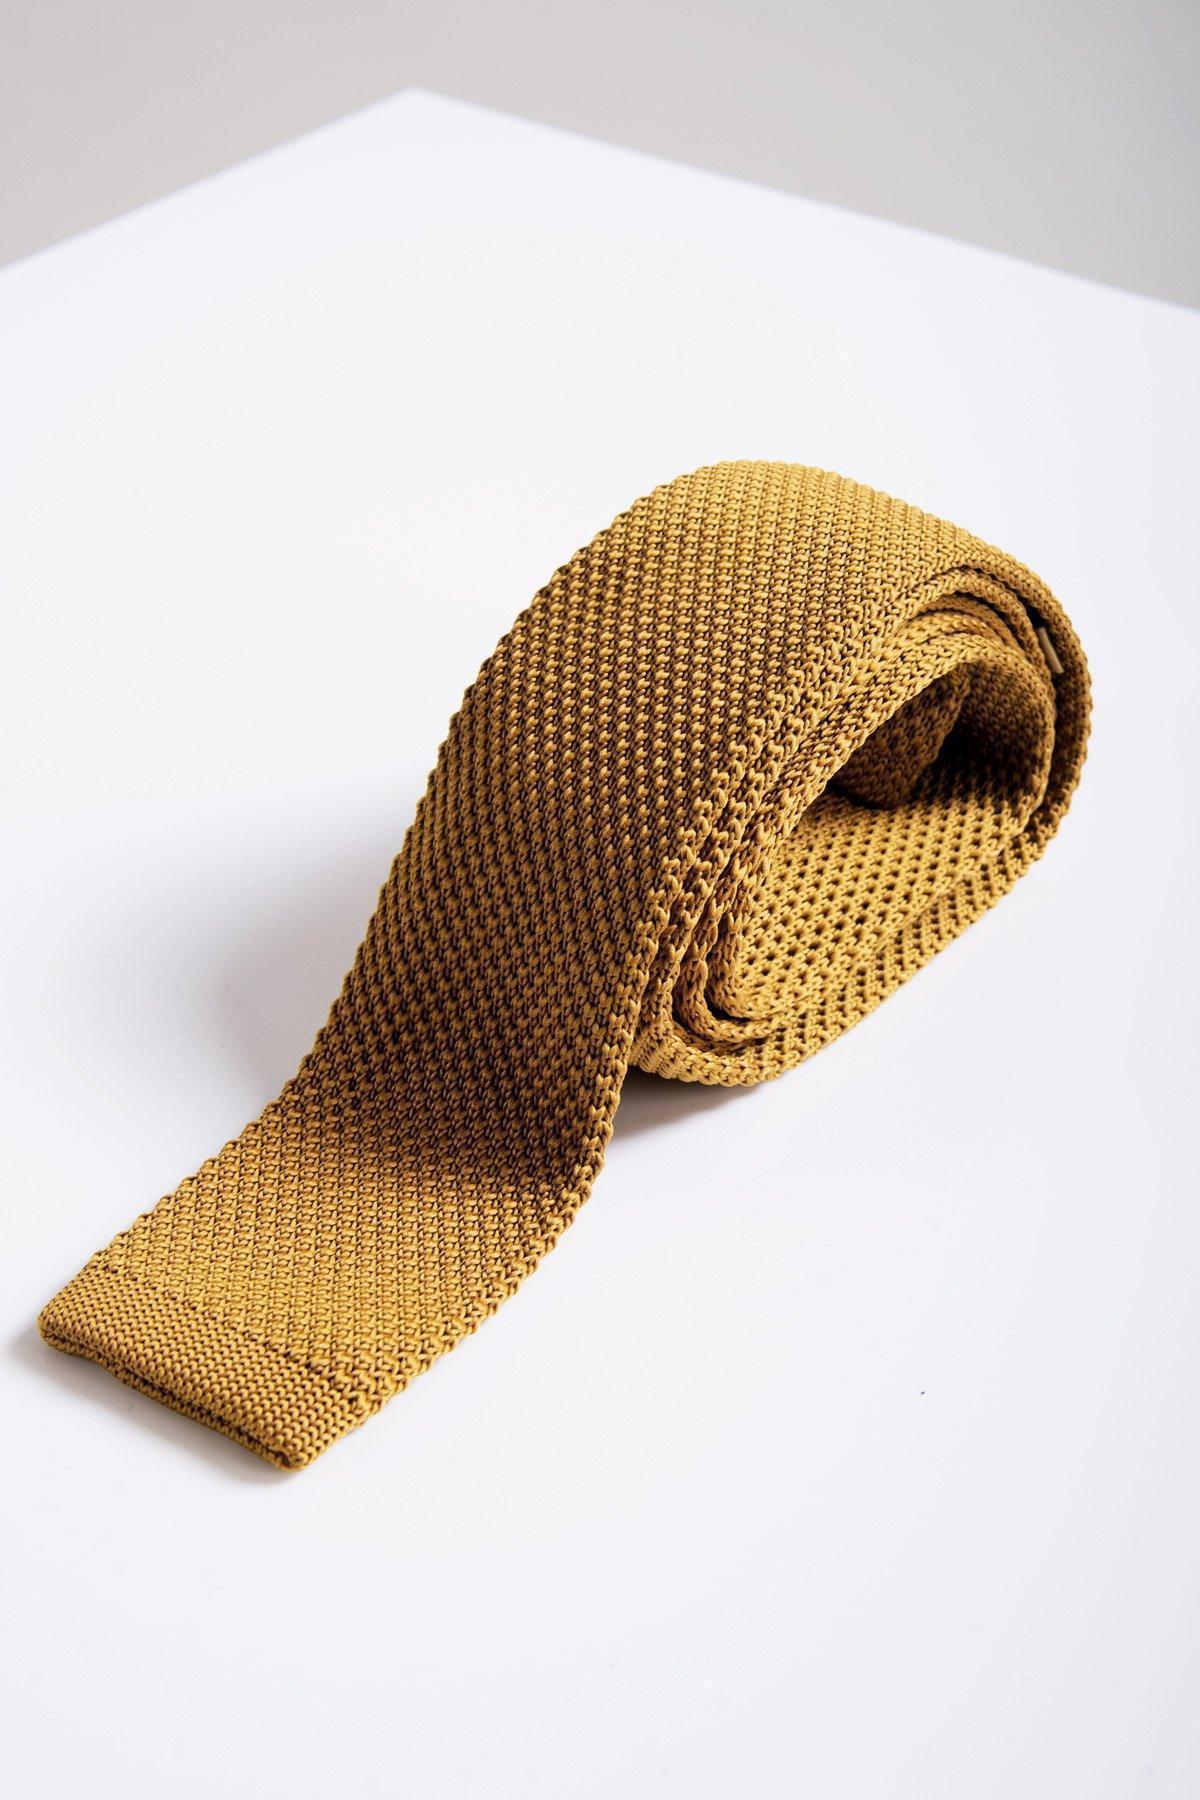 Knitted Mens Gold Tie